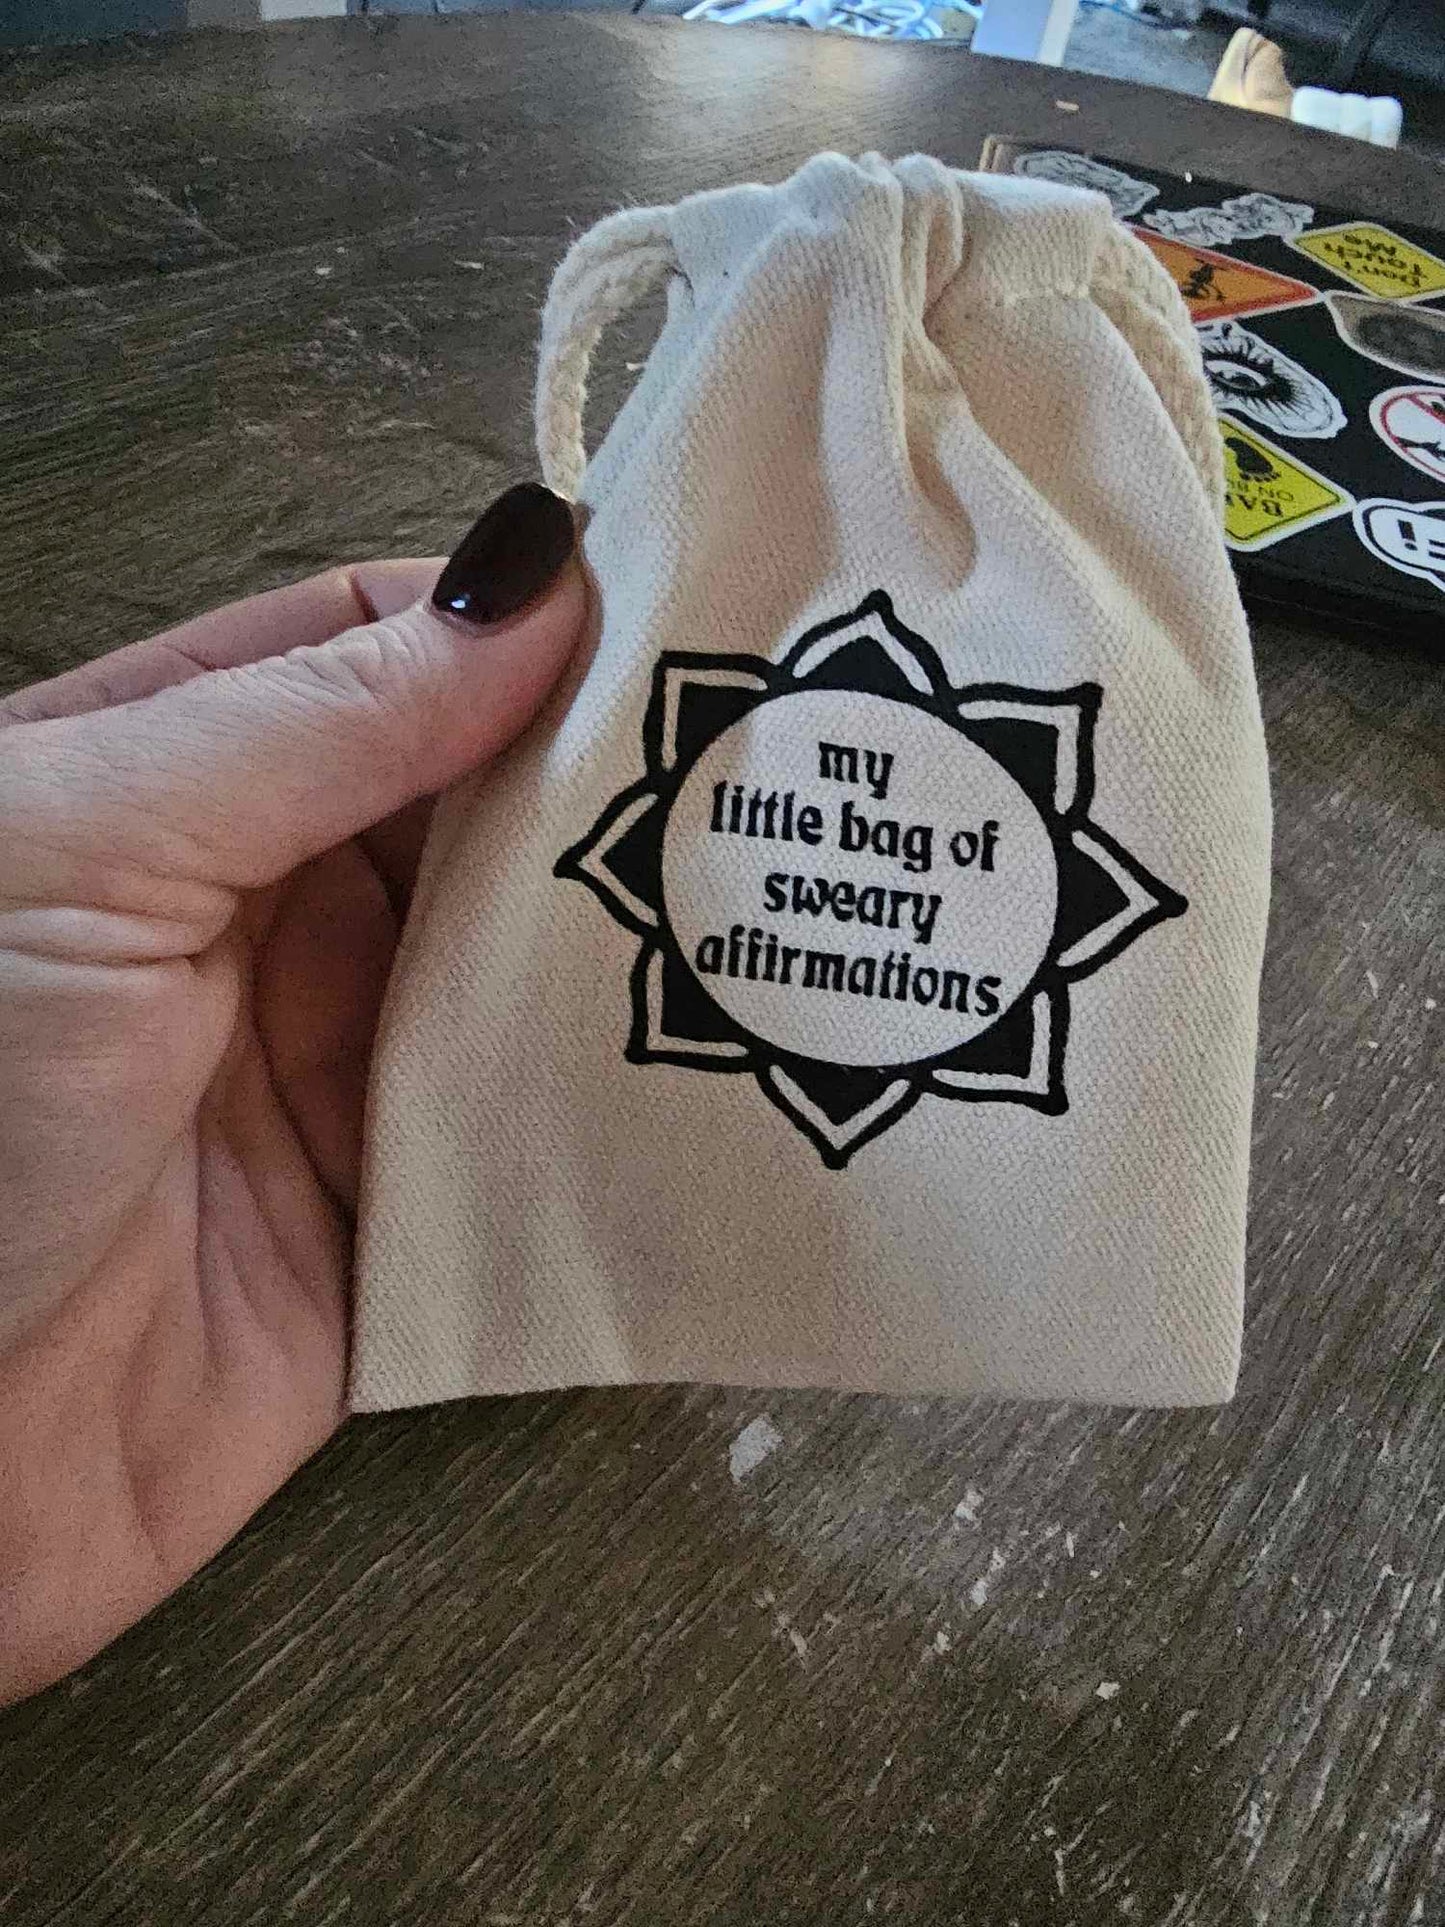 Bag of Sweary Affirmations